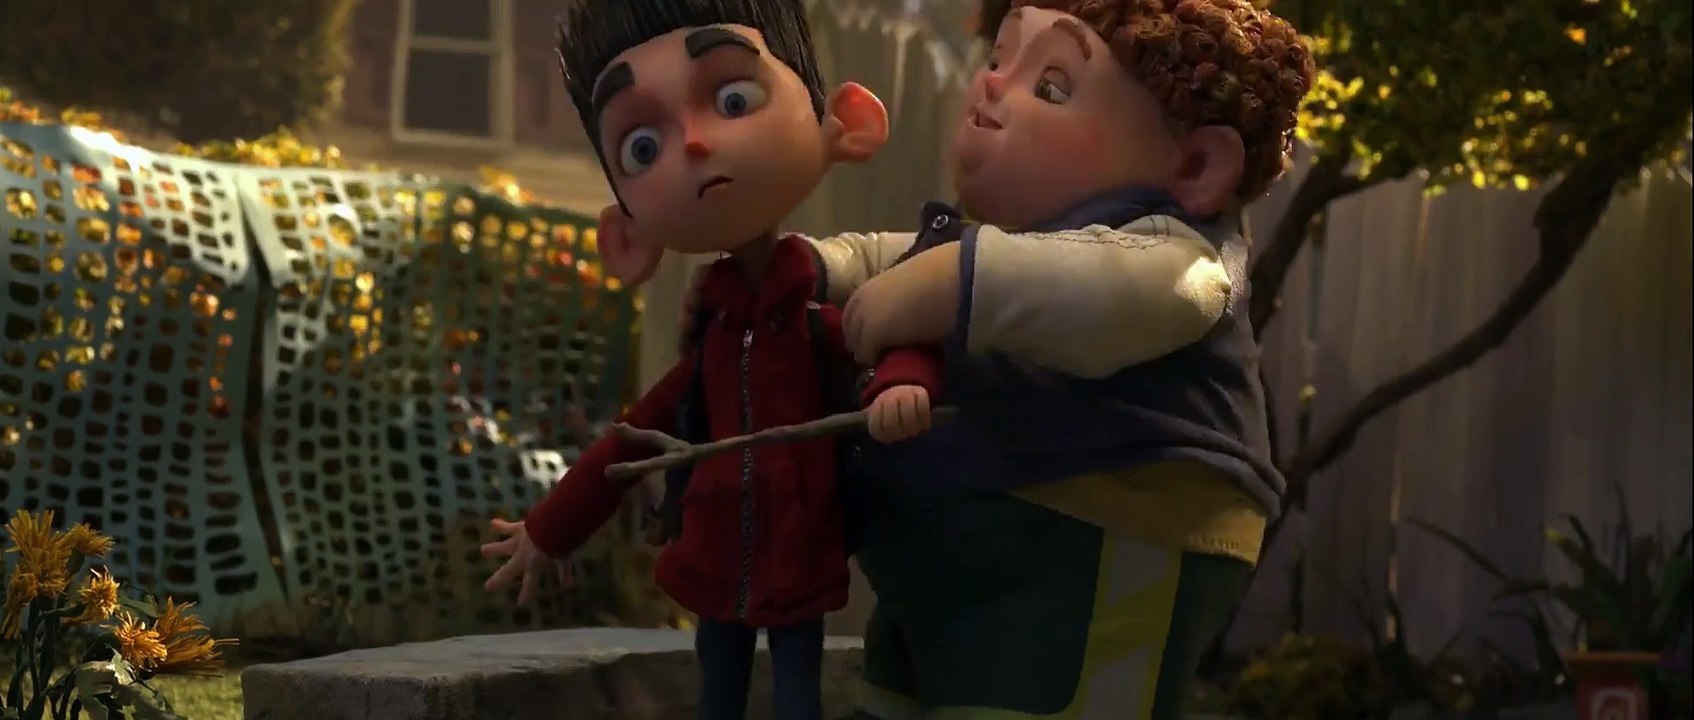 ParaNorman Full Movie Watch Online 123Movies